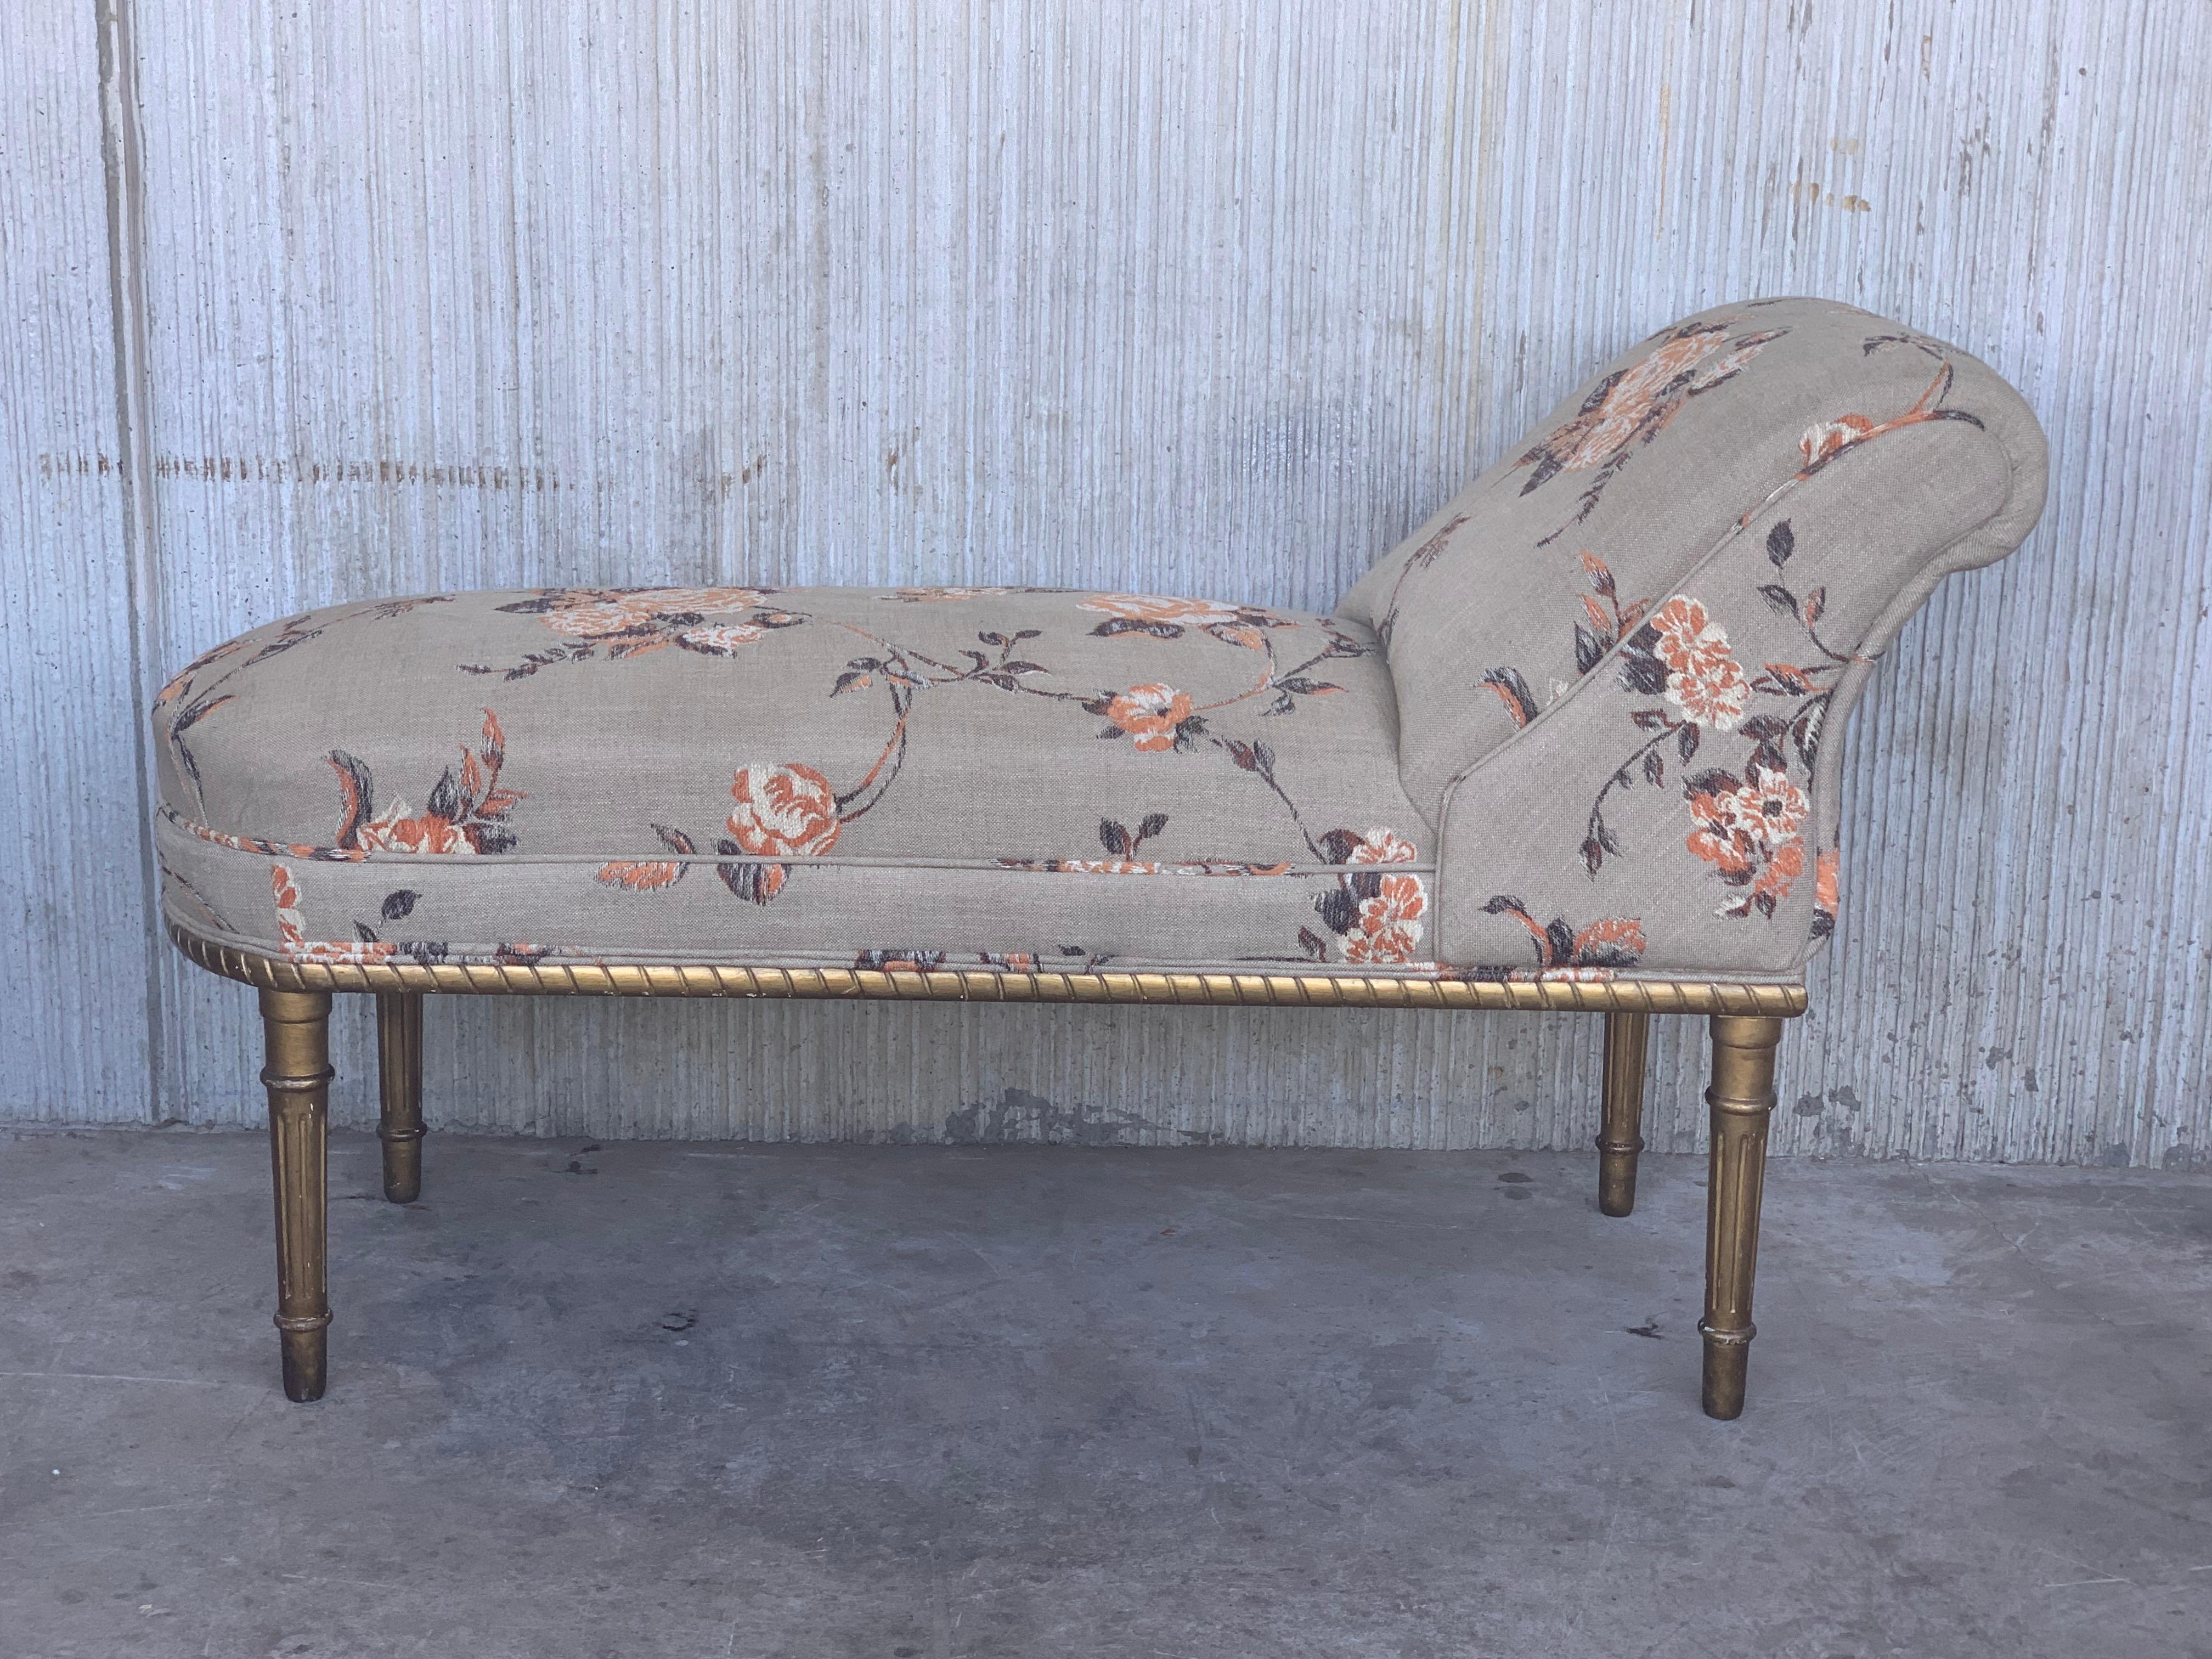 English England Regency Gilted & Upholstered Recamier or Chaise Longue, circa 1820